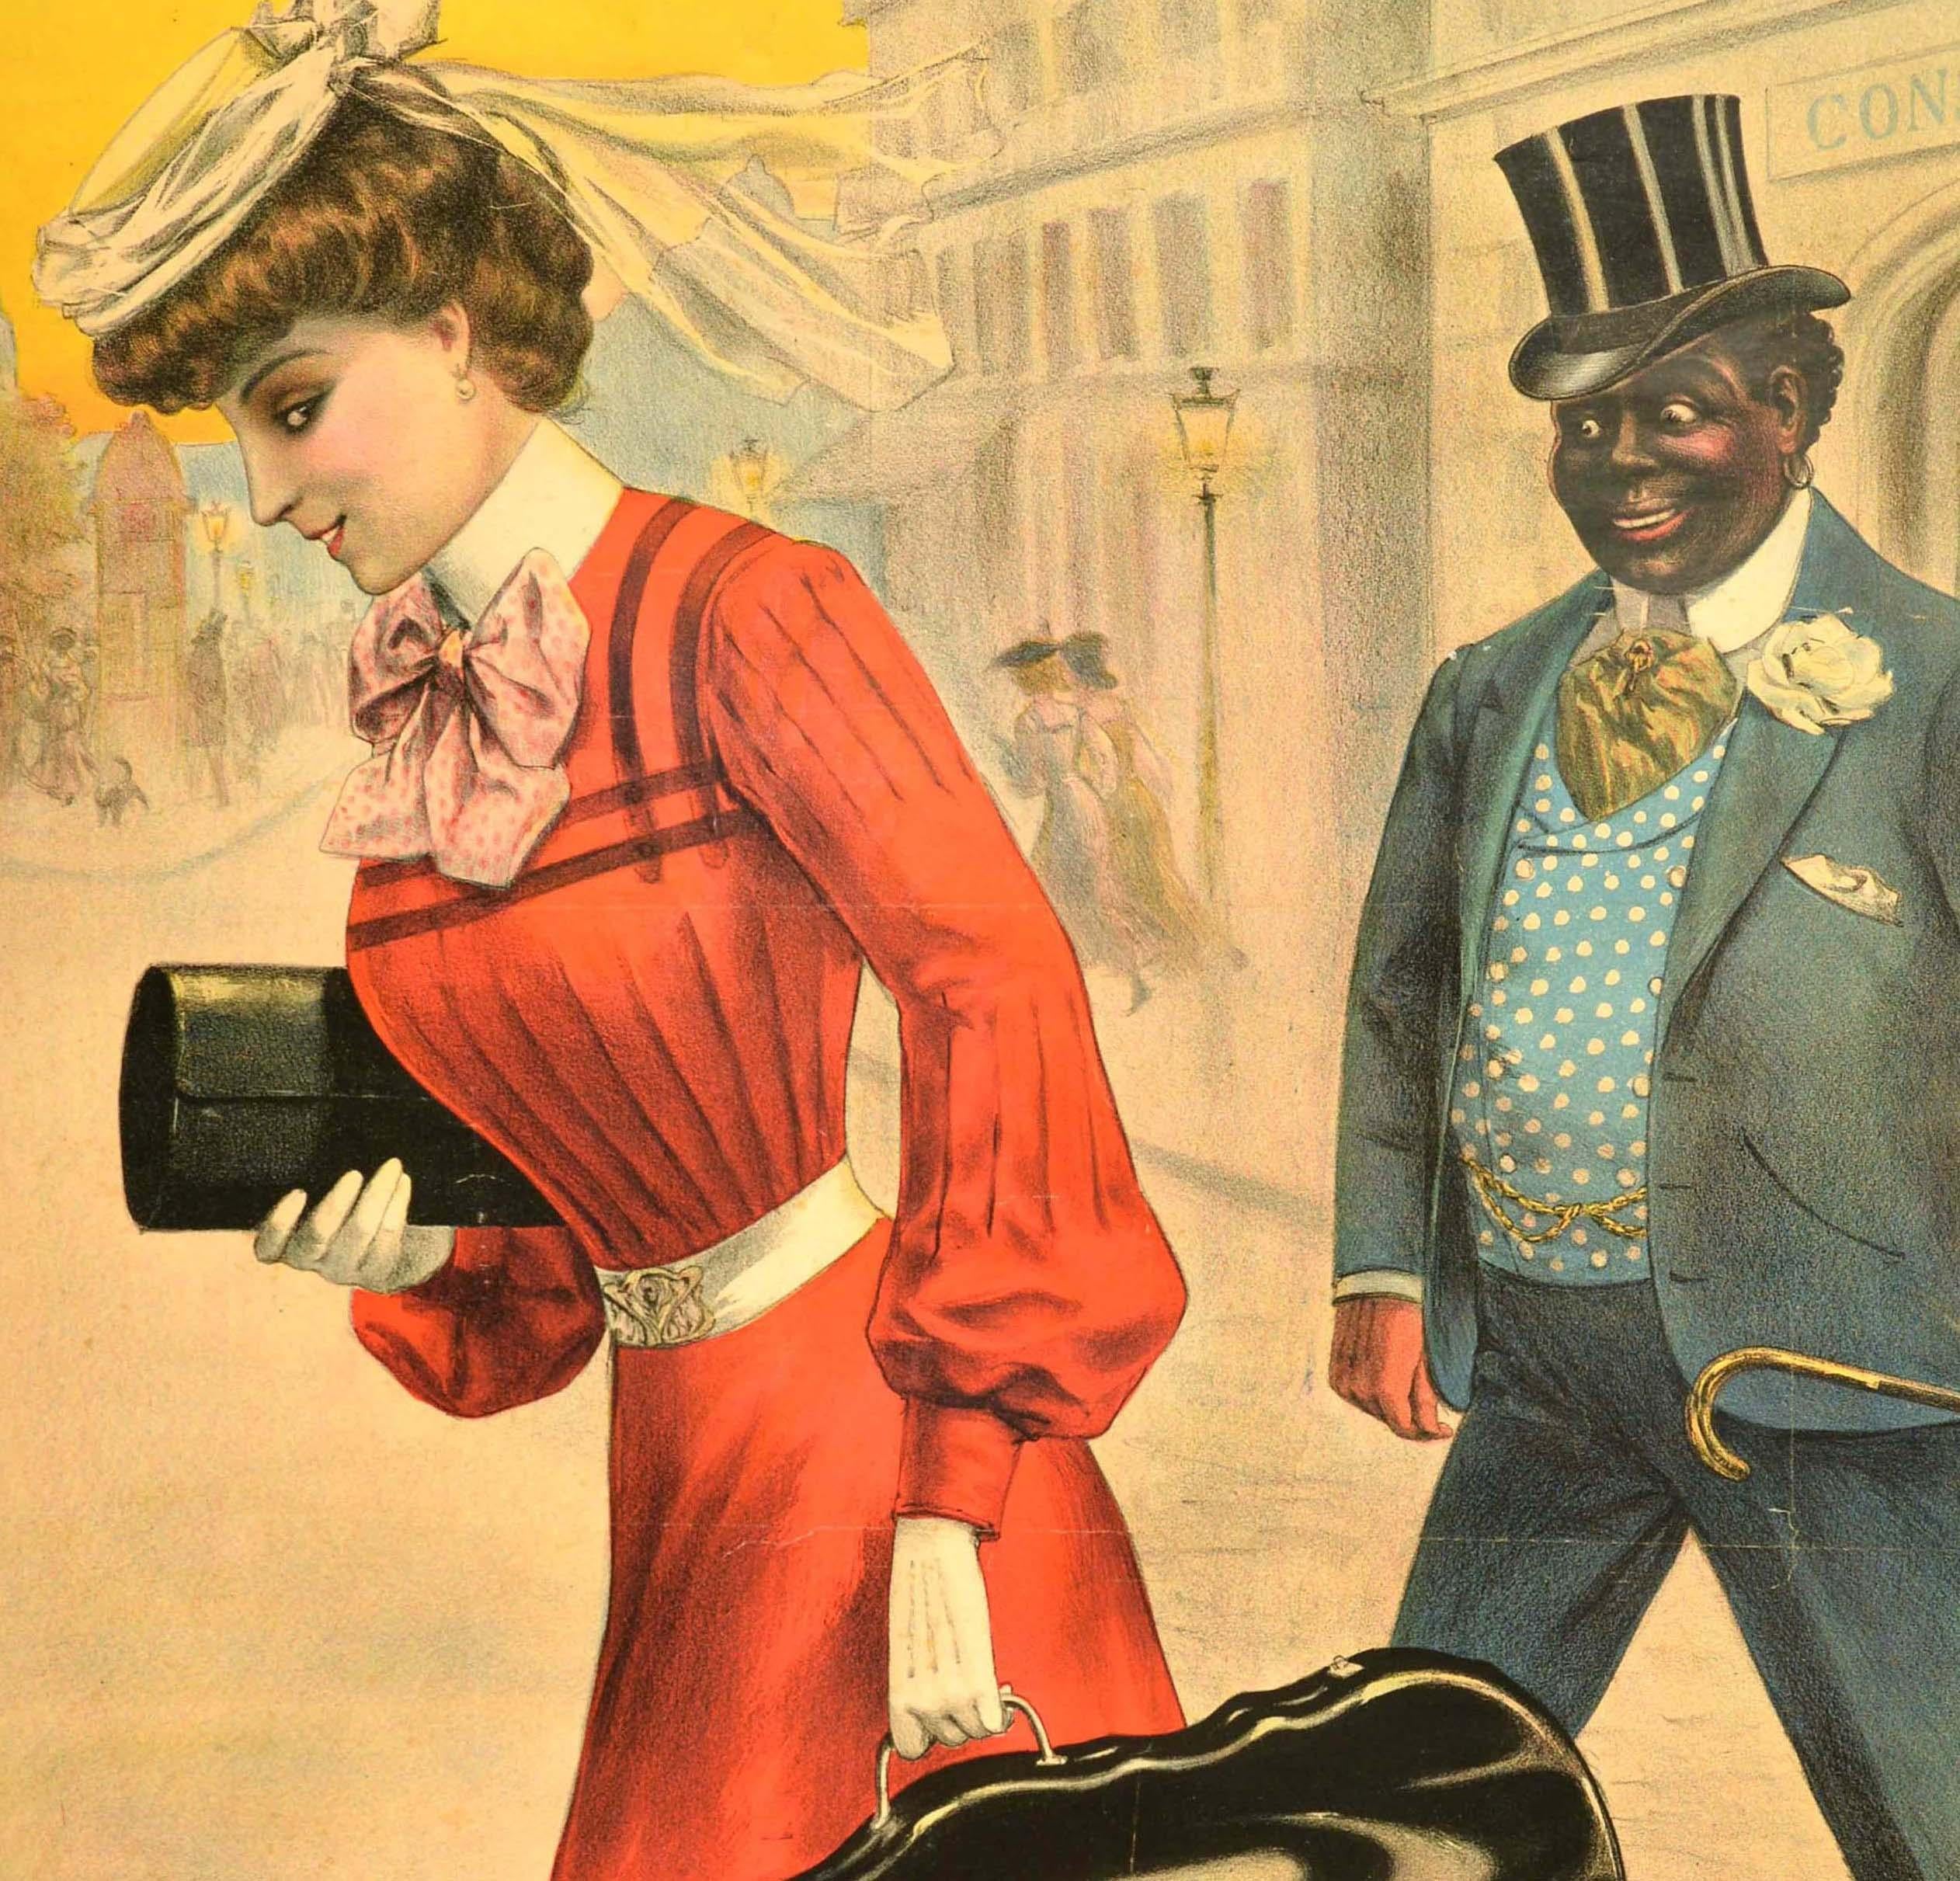 Original antique advertising poster for a play - The Frisco - featuring artwork by the French artist Louis Galice (1864-1935) of a lady in a fashionable red dress and white hat carrying a violin case in her gloved hand, a gentleman in a smart suit